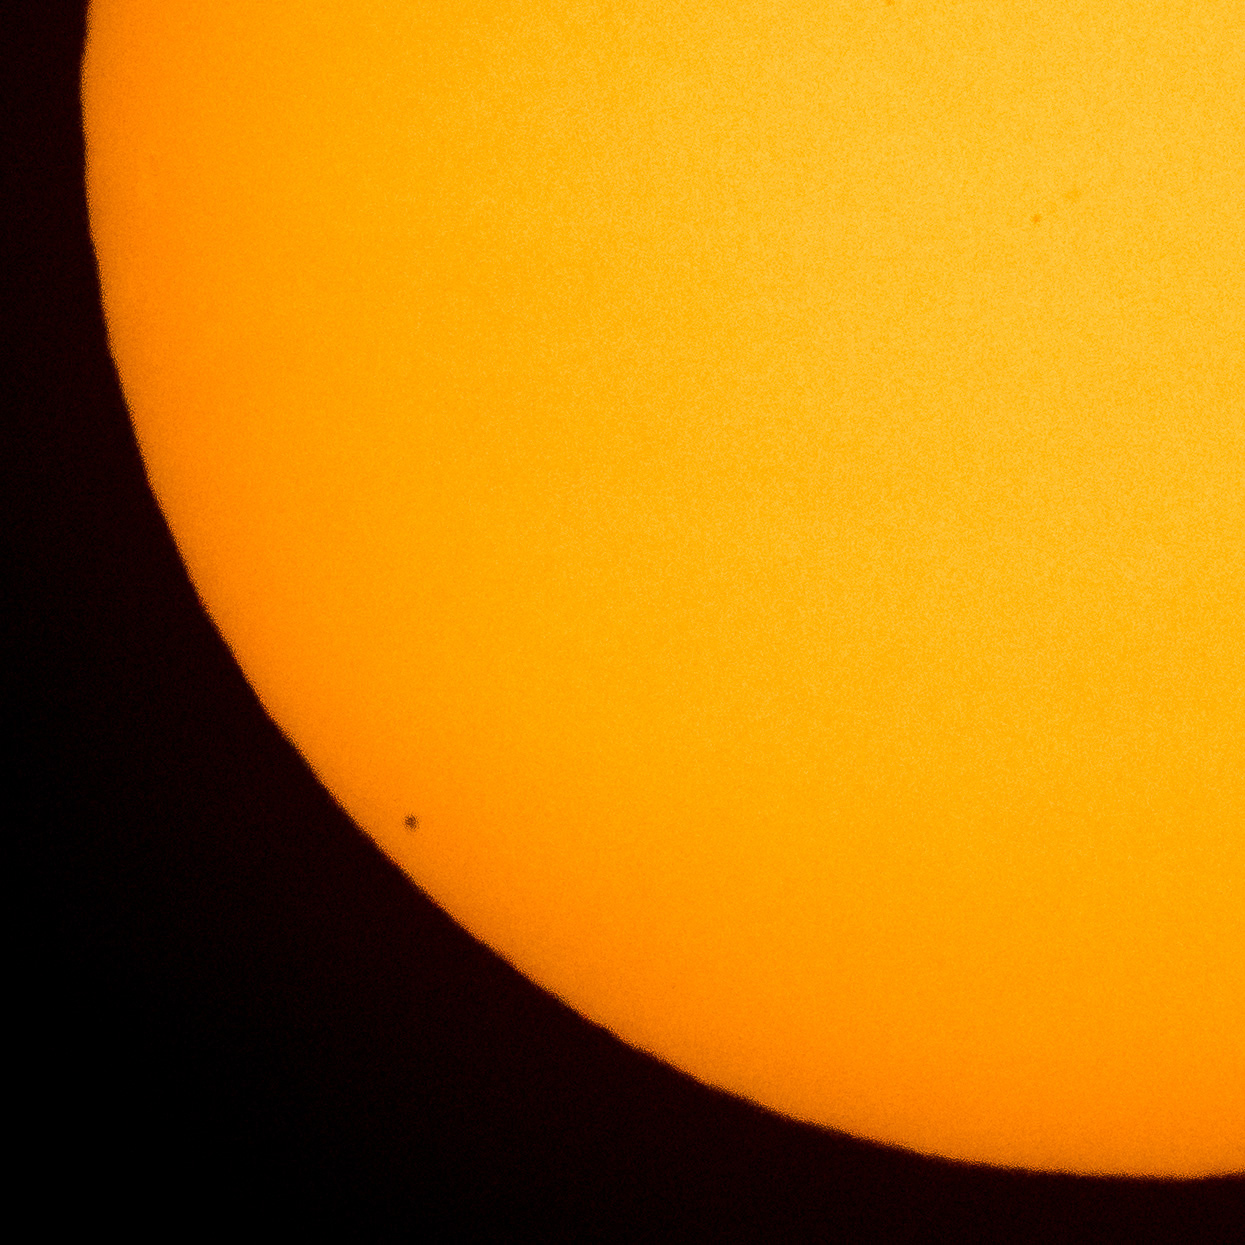 the sun, close up, with tiny planet Mercury visible in front of it